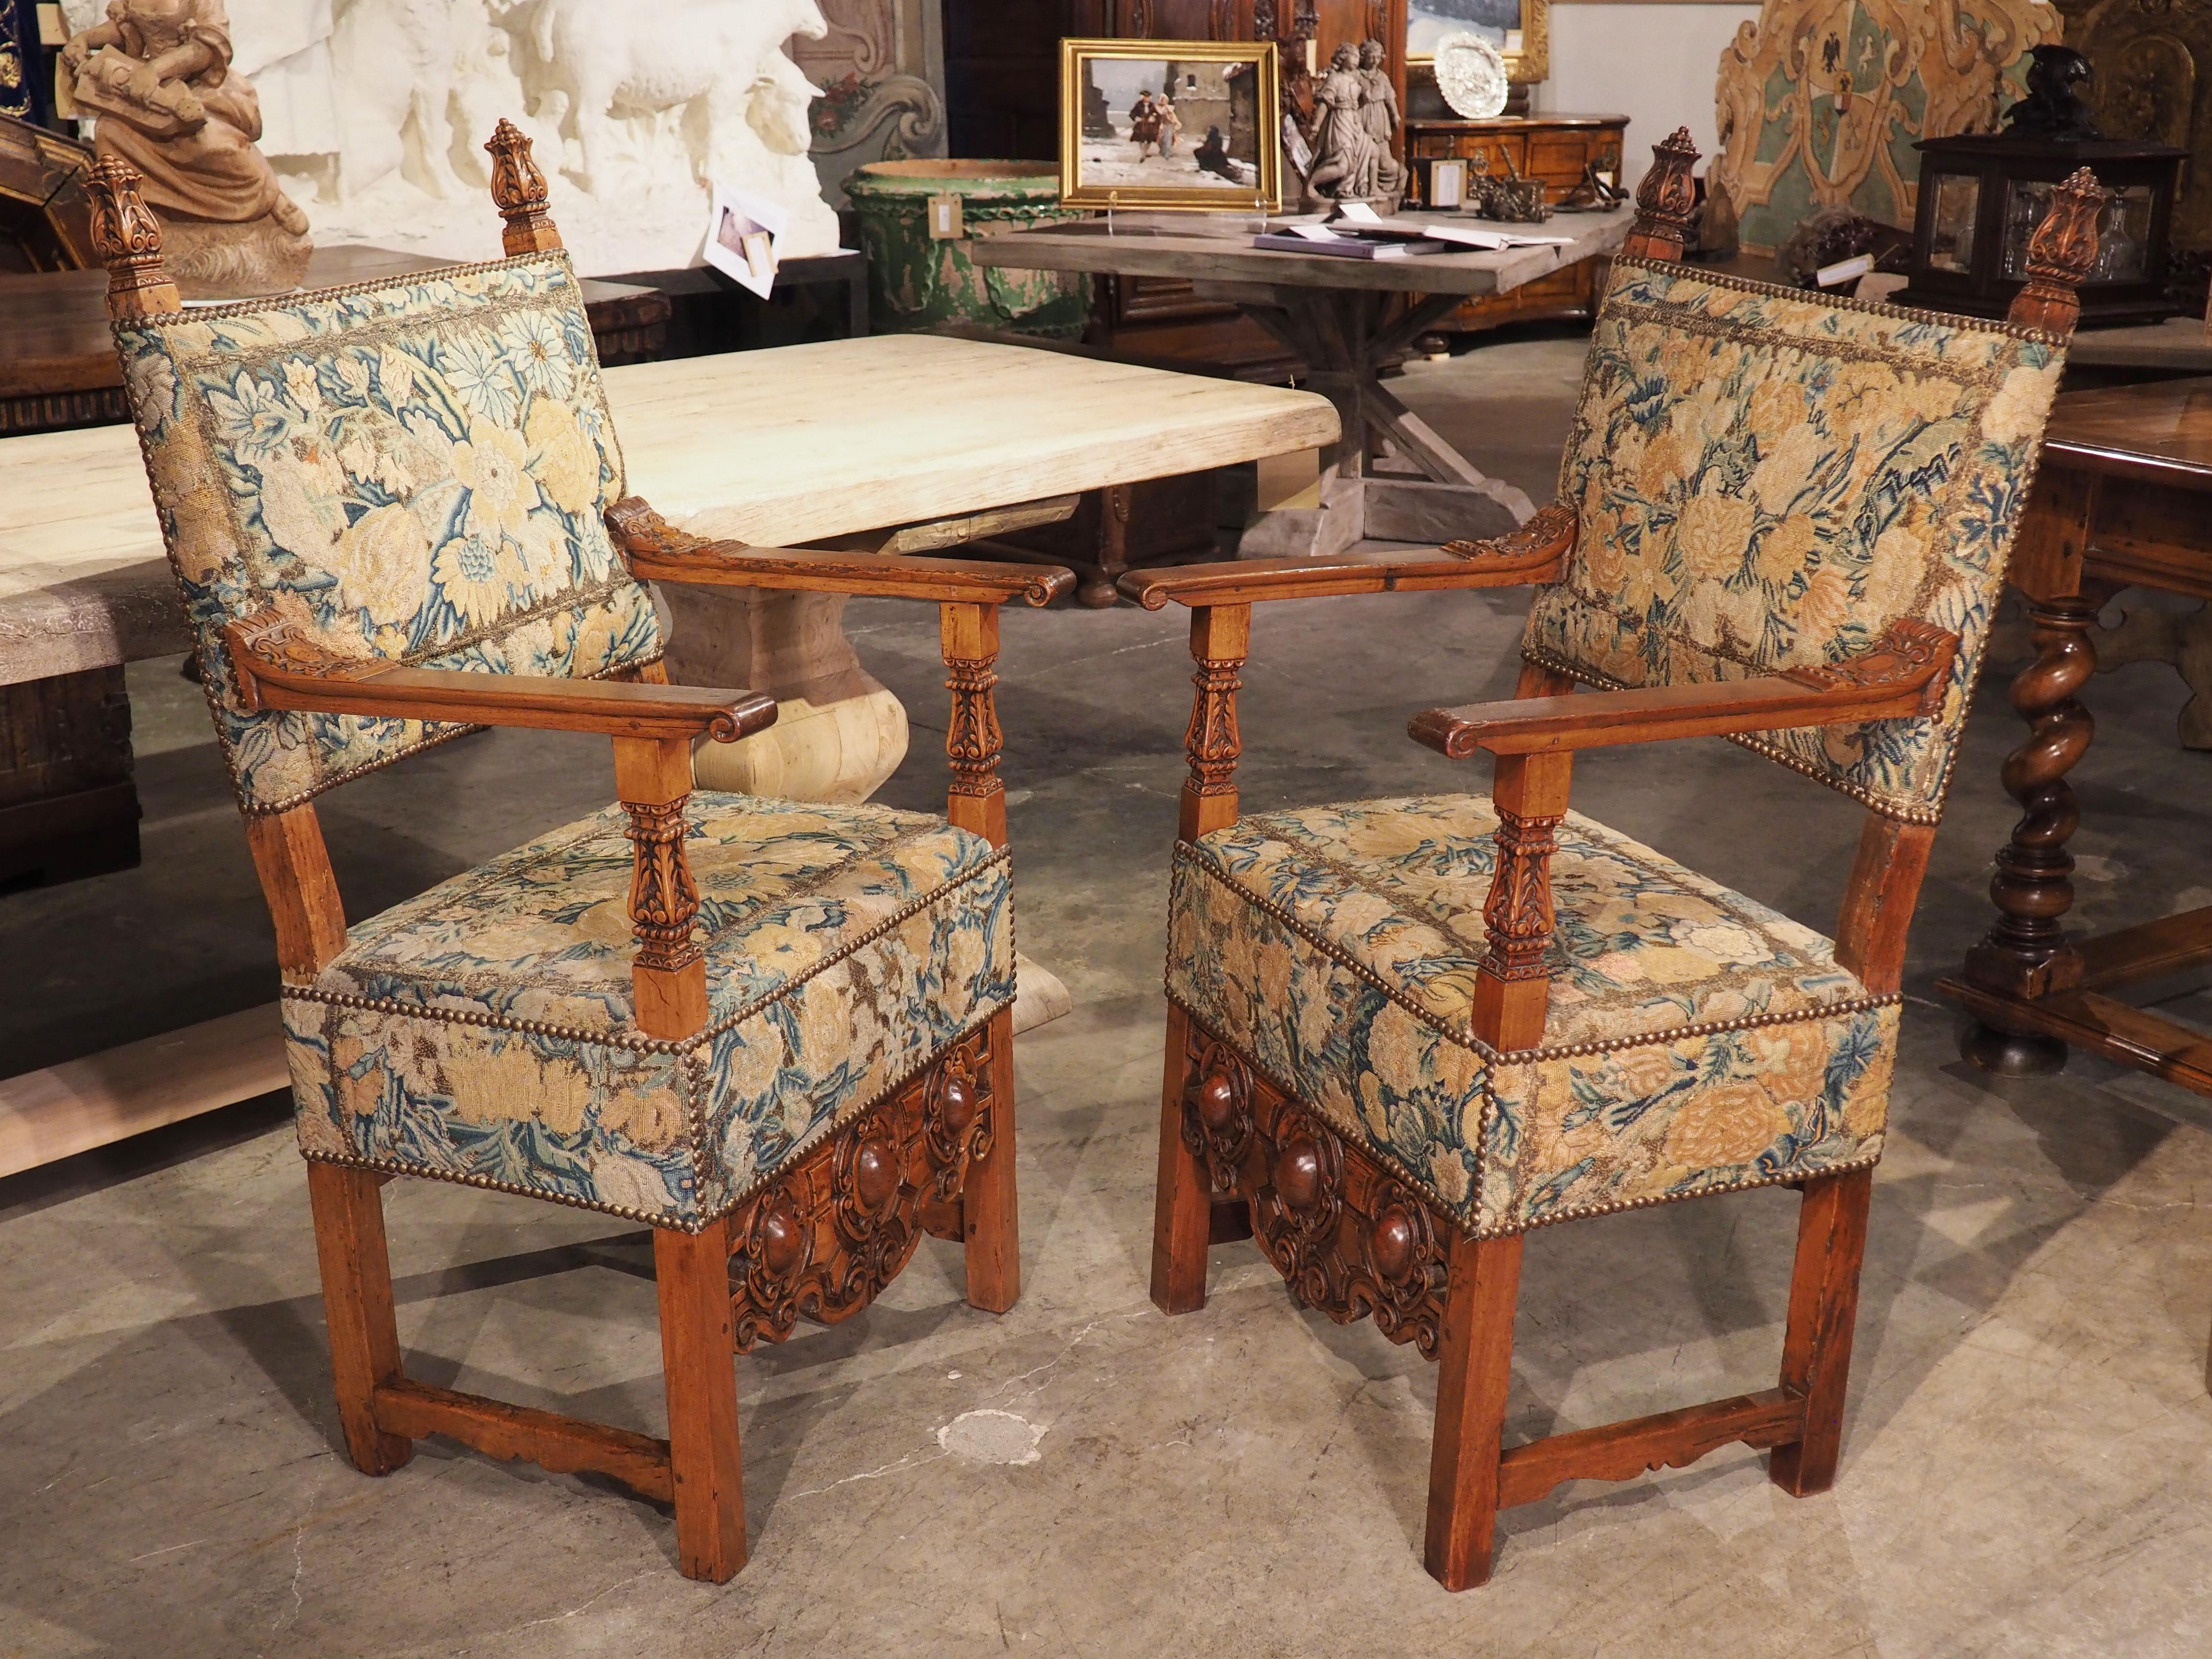 Hand-carved in Italy in the 1600’s, this pair of elegant walnut armchairs features a rich foliate and floral needlepoint upholstery. The chairbacks, seats and aprons of each chair has been covered by embroidery patterned with green, gold, and pink